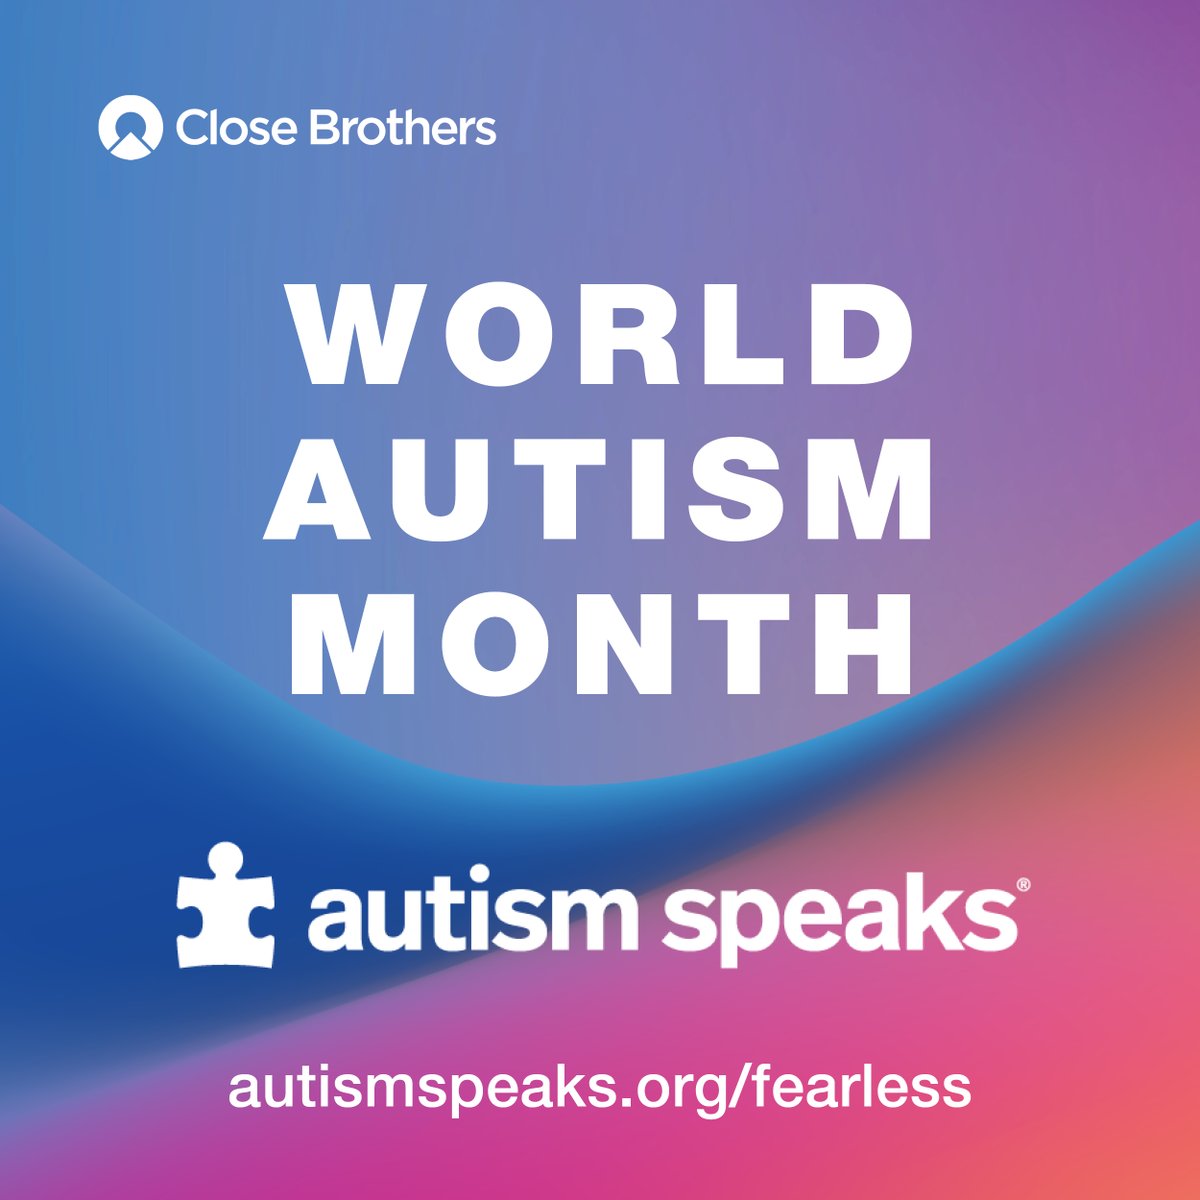 Close Brothers is proud to celebrate World Autism Month. Our Neurodiversity Working Group is committed to supporting our neurodivergent colleagues, including those with autism, by creating a space where everyone can feel safe, grow, and flourish. #CloseBrothers #Neurodiversity